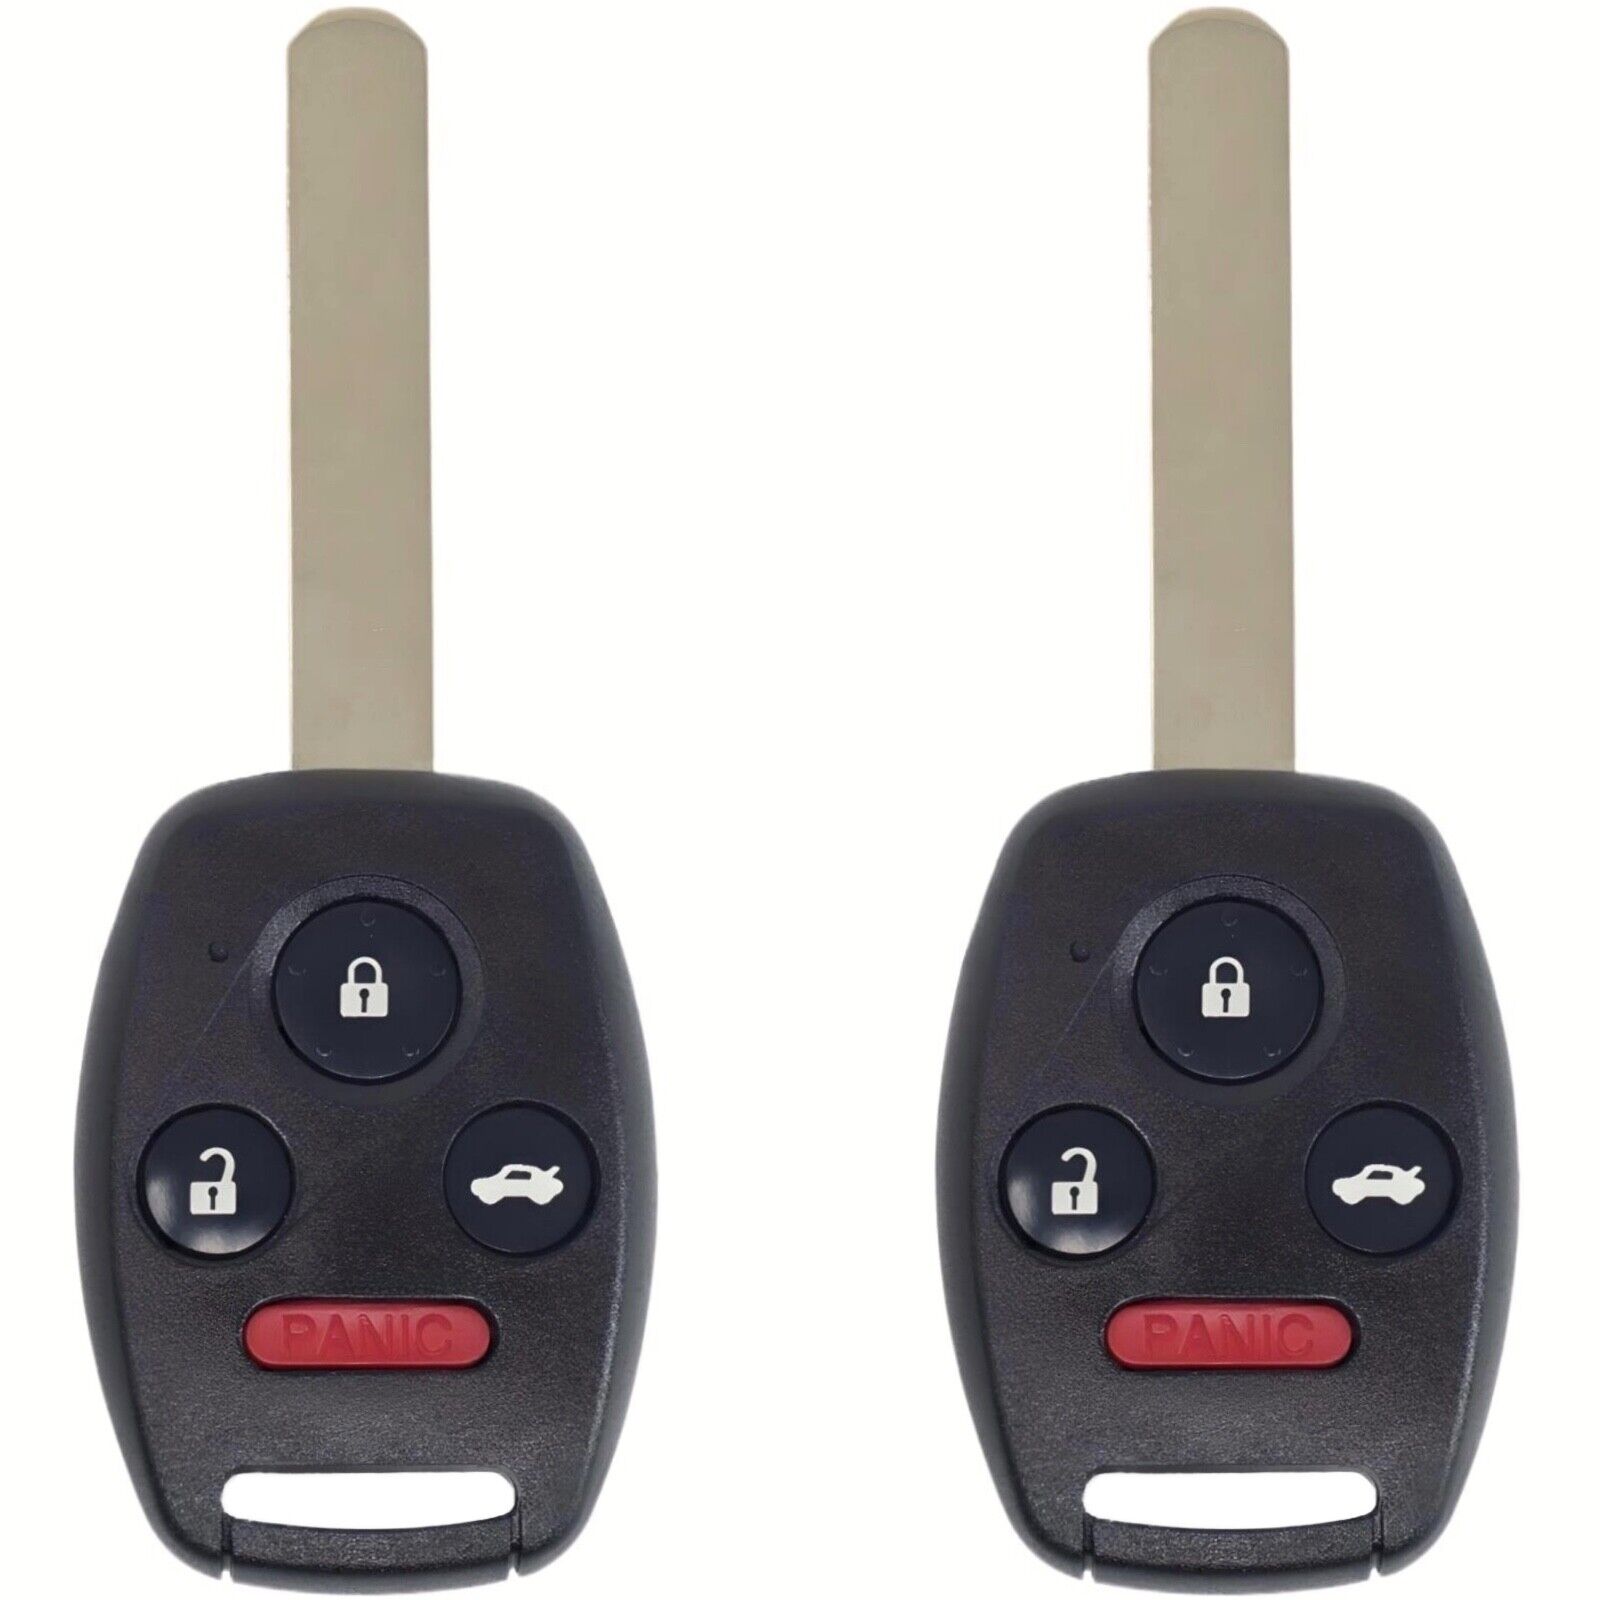 2x New Remote Key Fob Replacement For Honda Civic and Acura CSX 35111-SVA-306